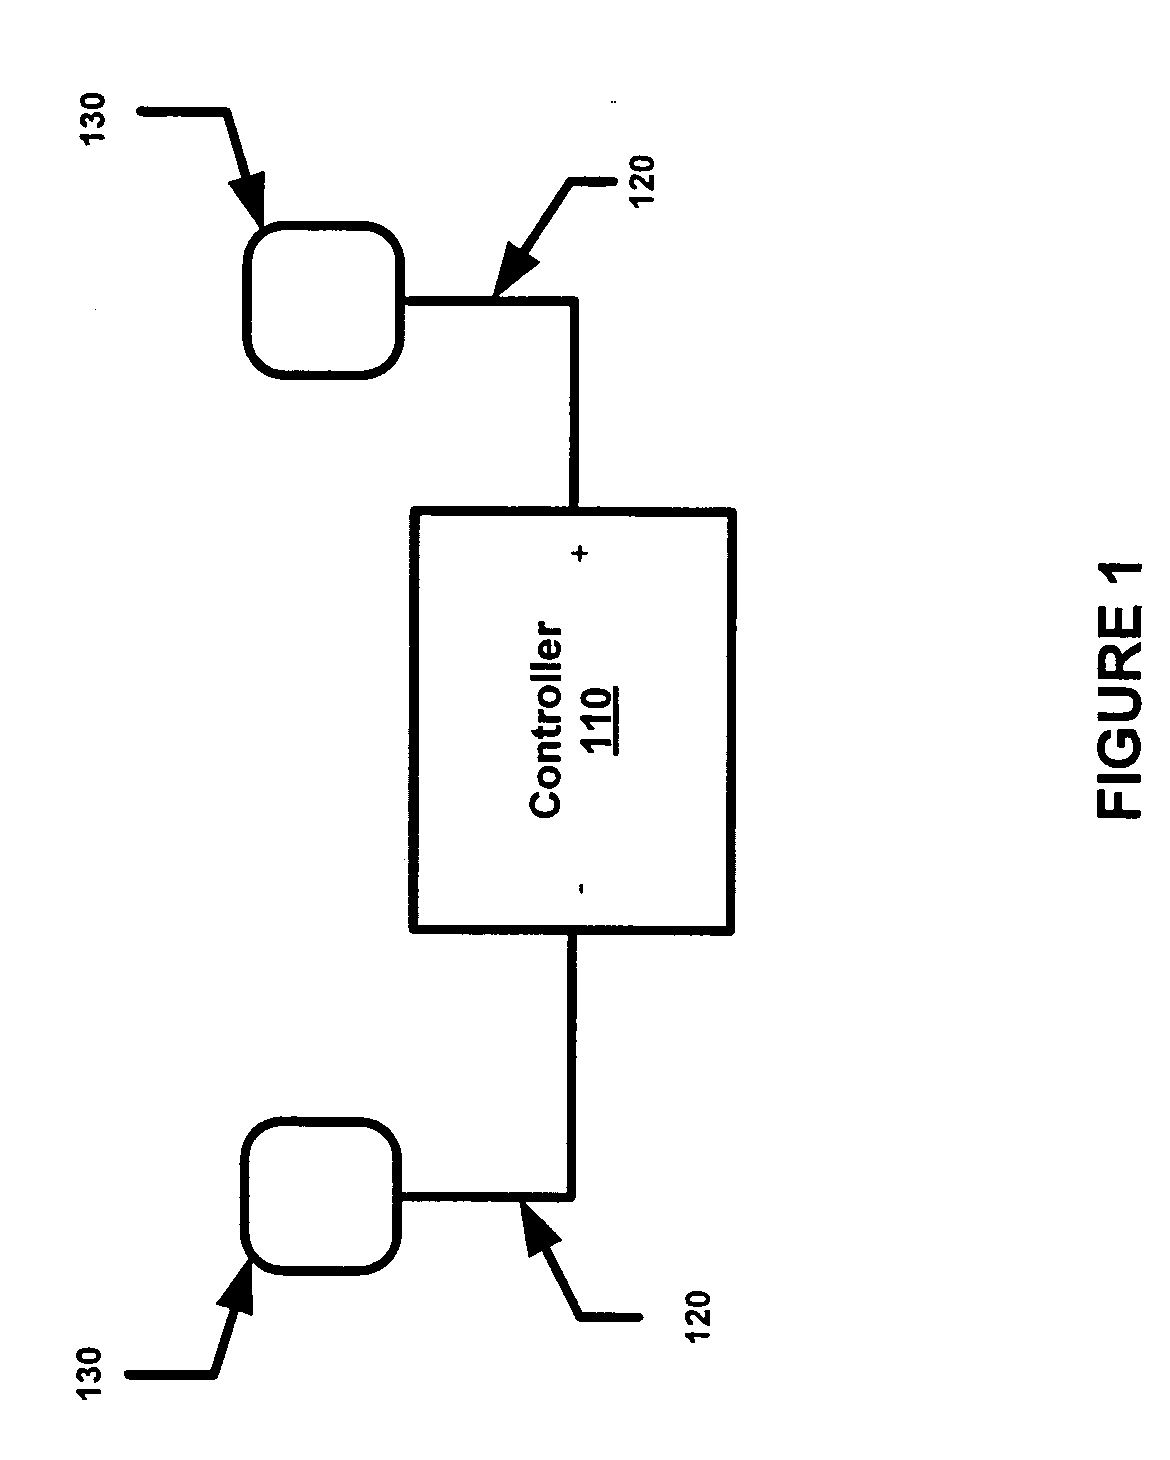 Method for delivery of pharmaceuticals for treating or preventing presbyopia